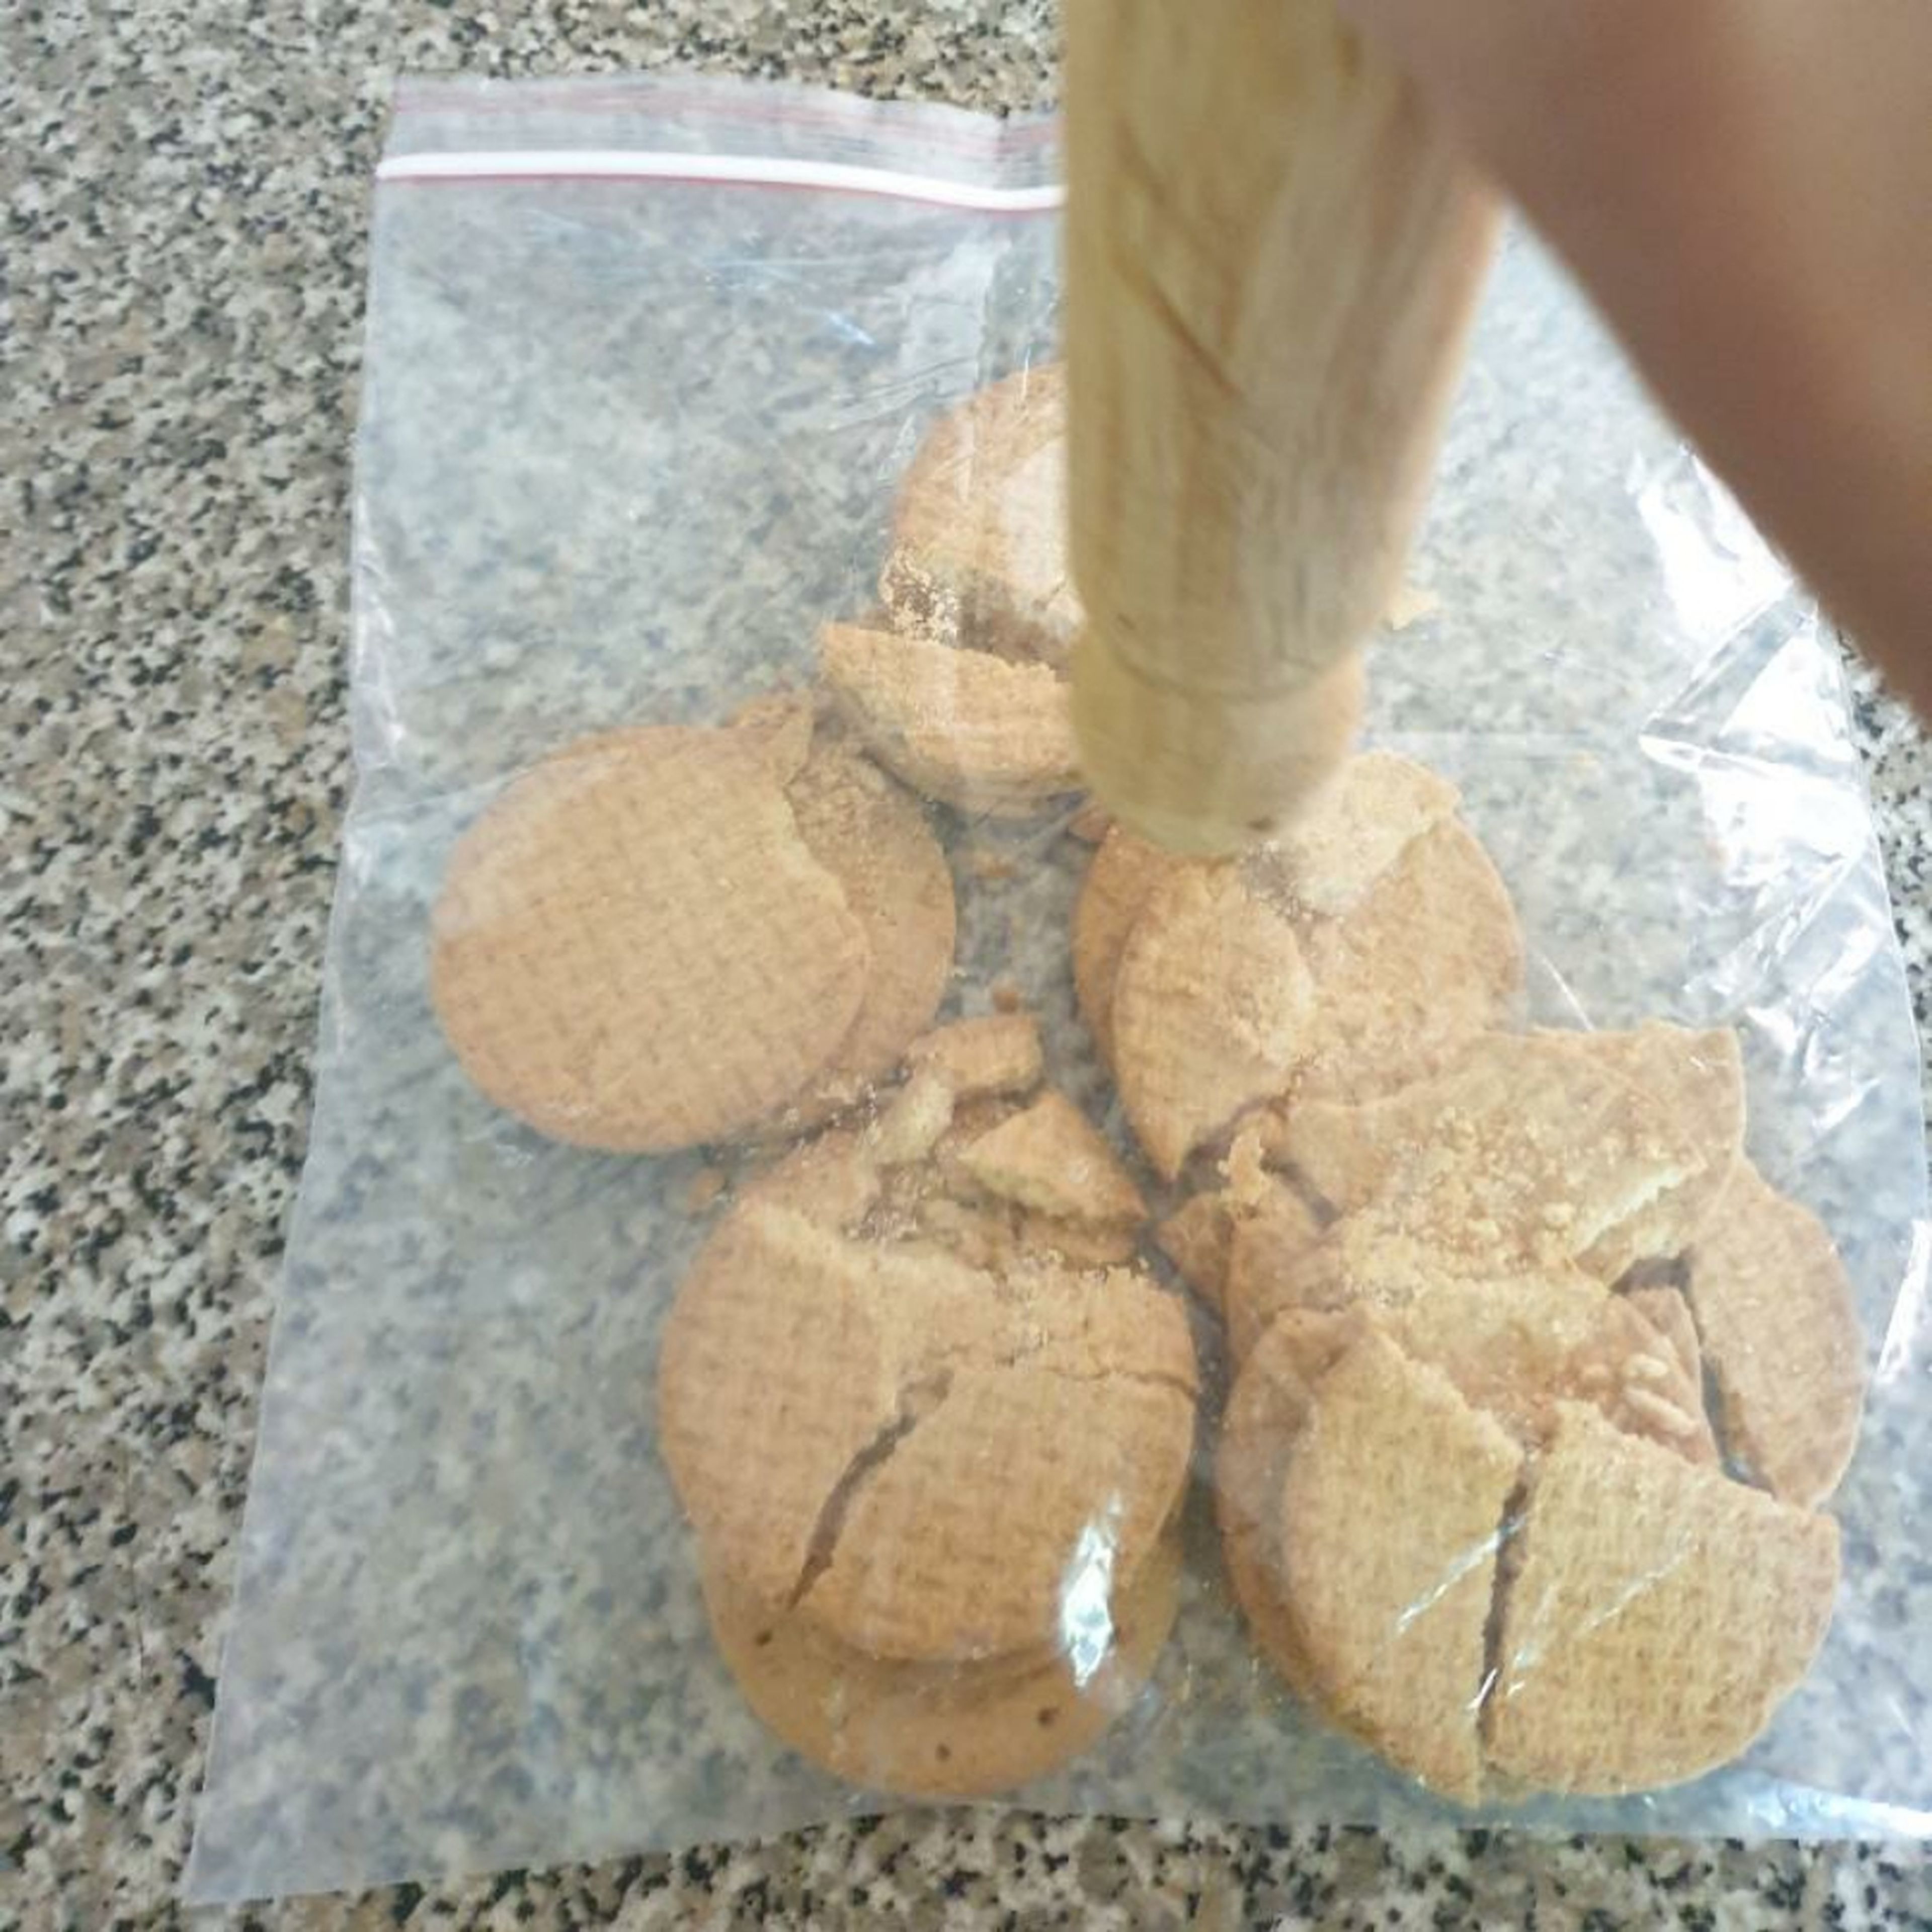 Crush the biscuits in a freezer bag, using a rolling pin.